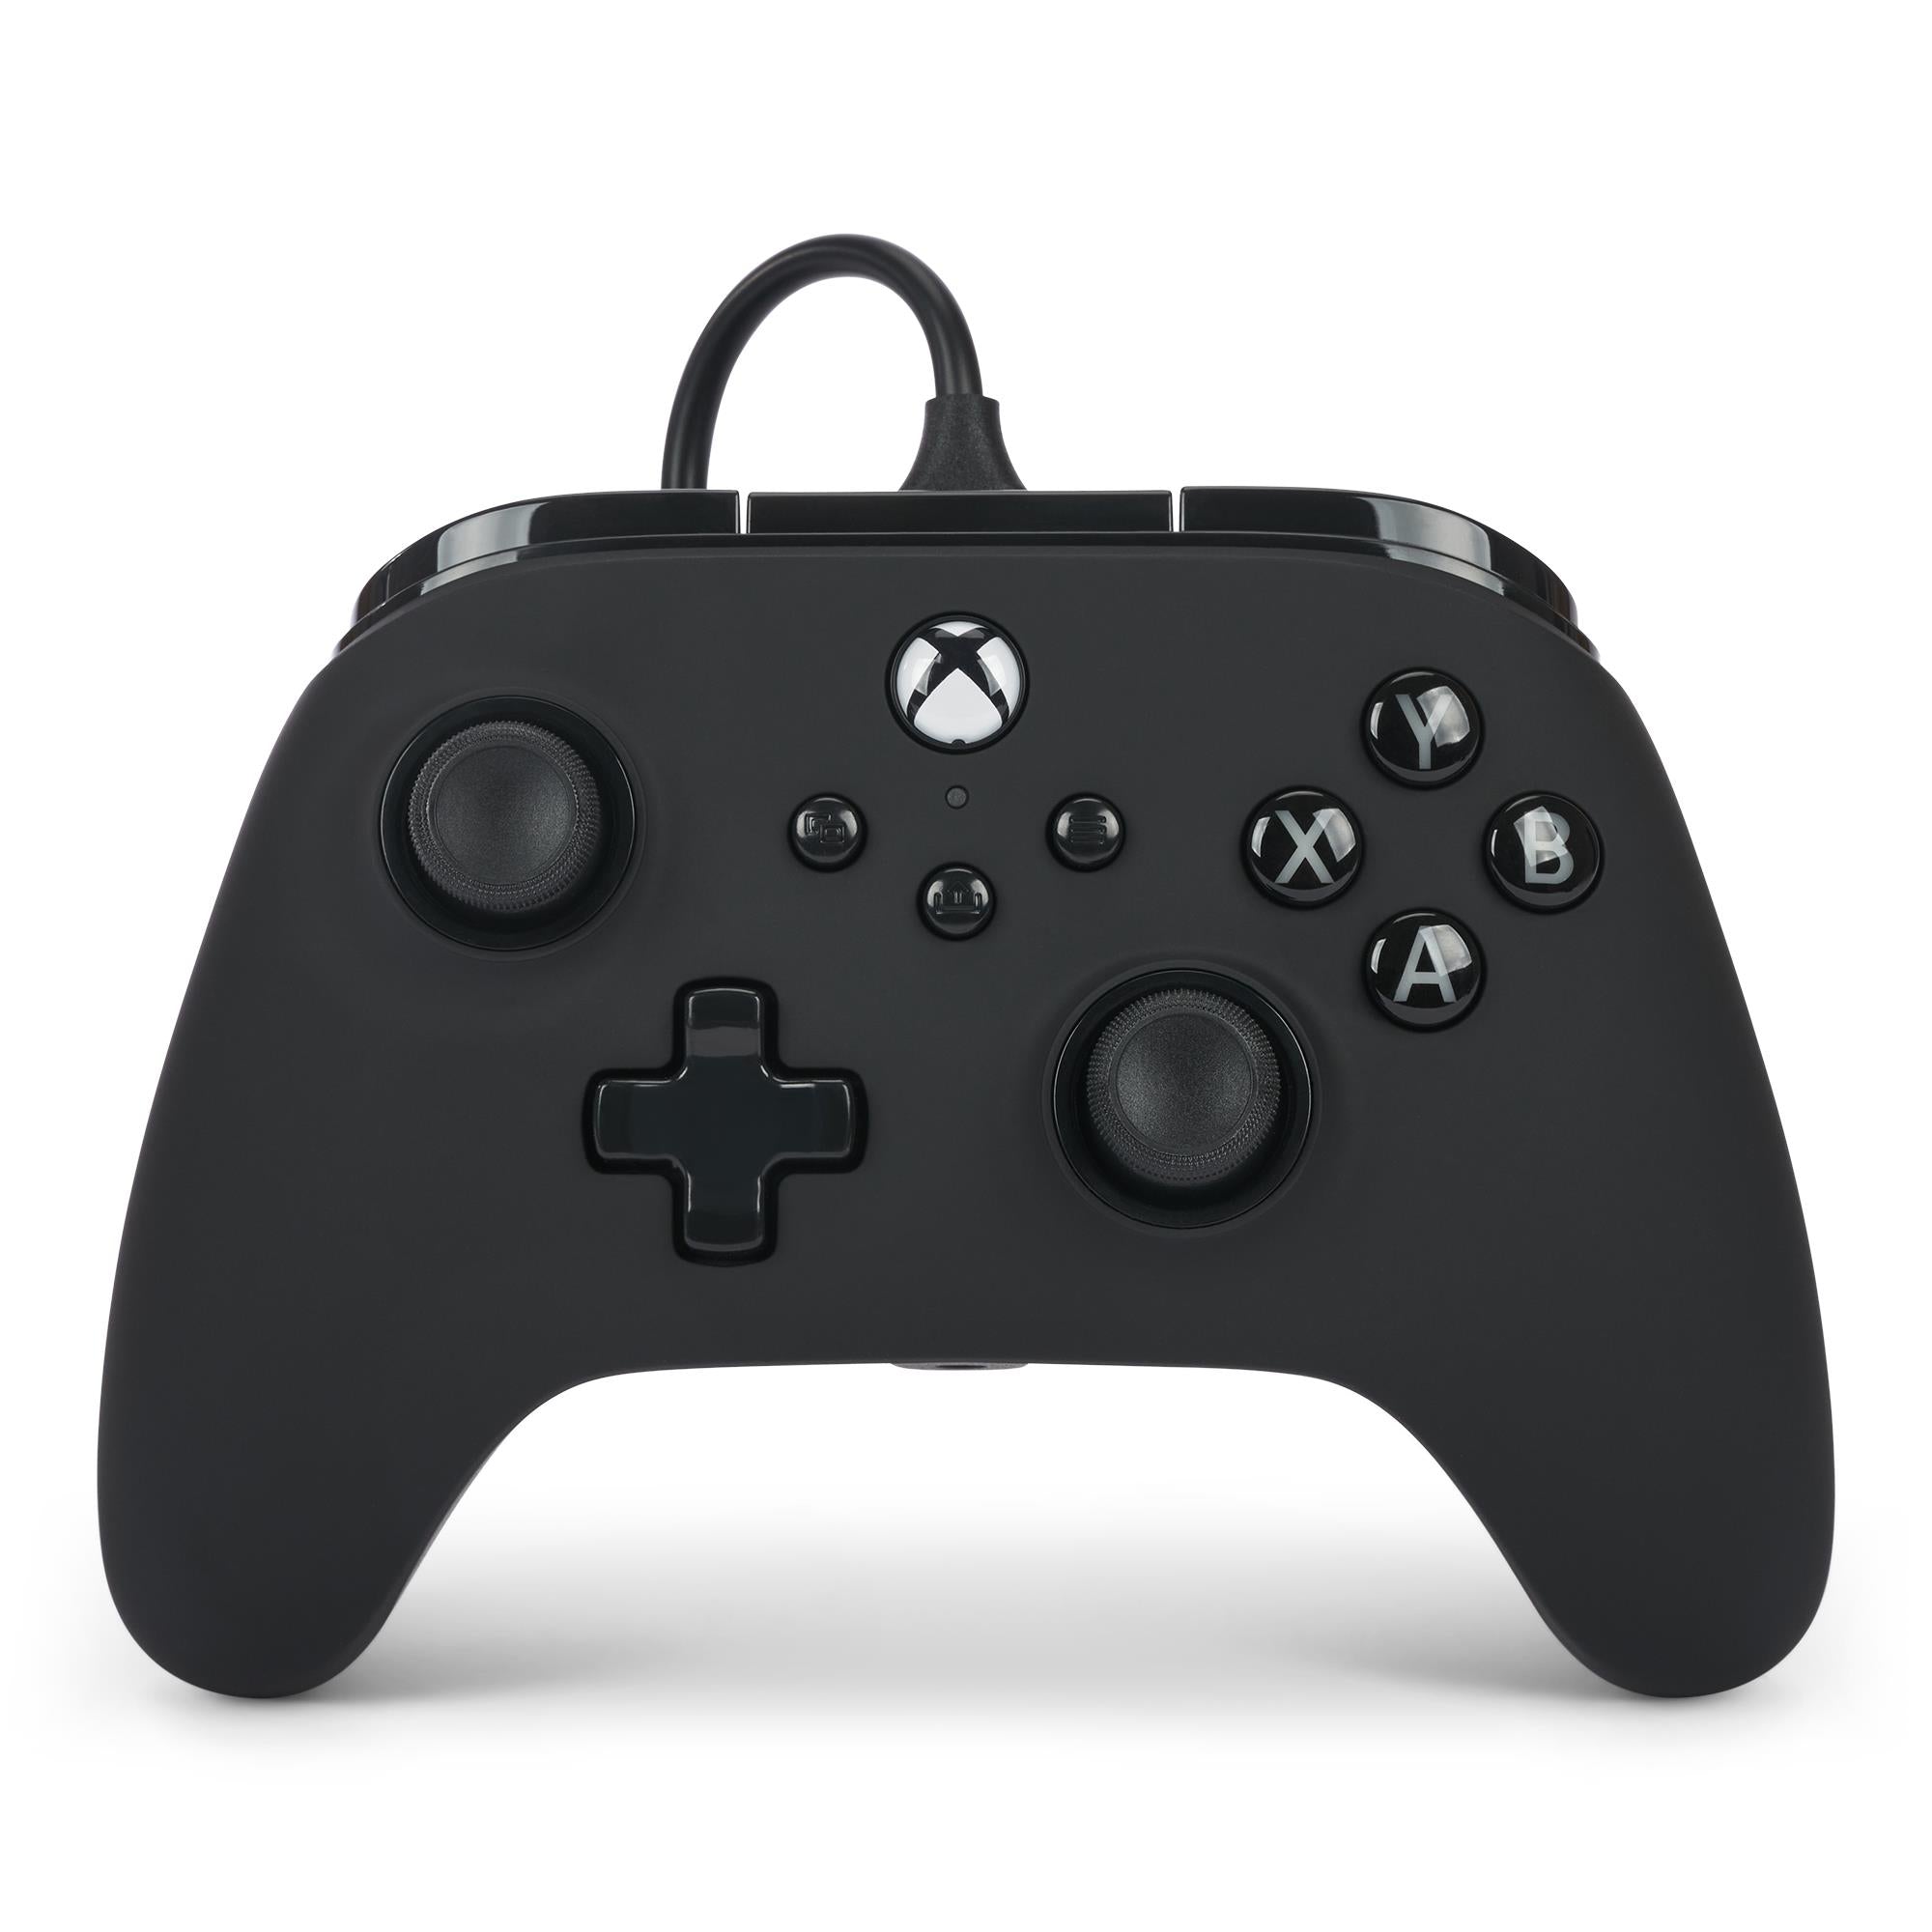 powera advantage wired controller for xbox series x|s (black)